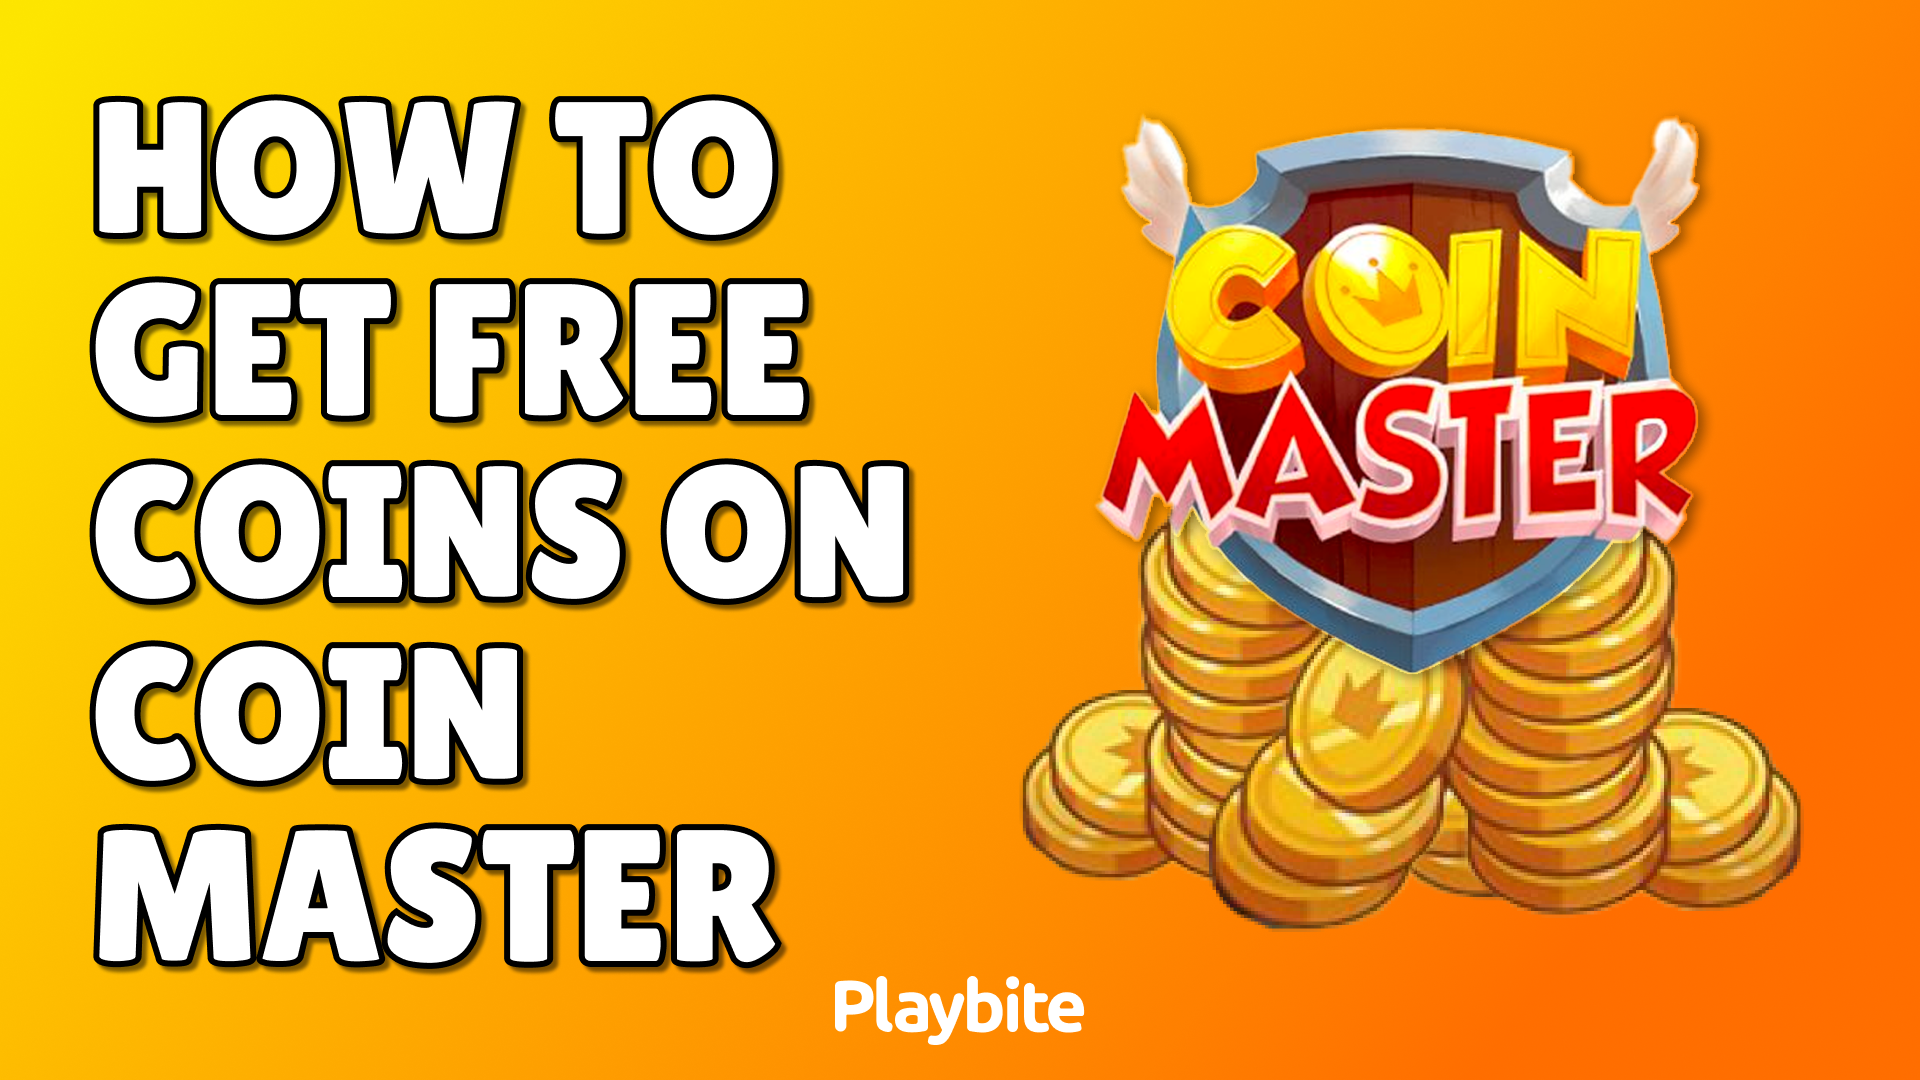 How To Get More Stars in Coin Master - N4G